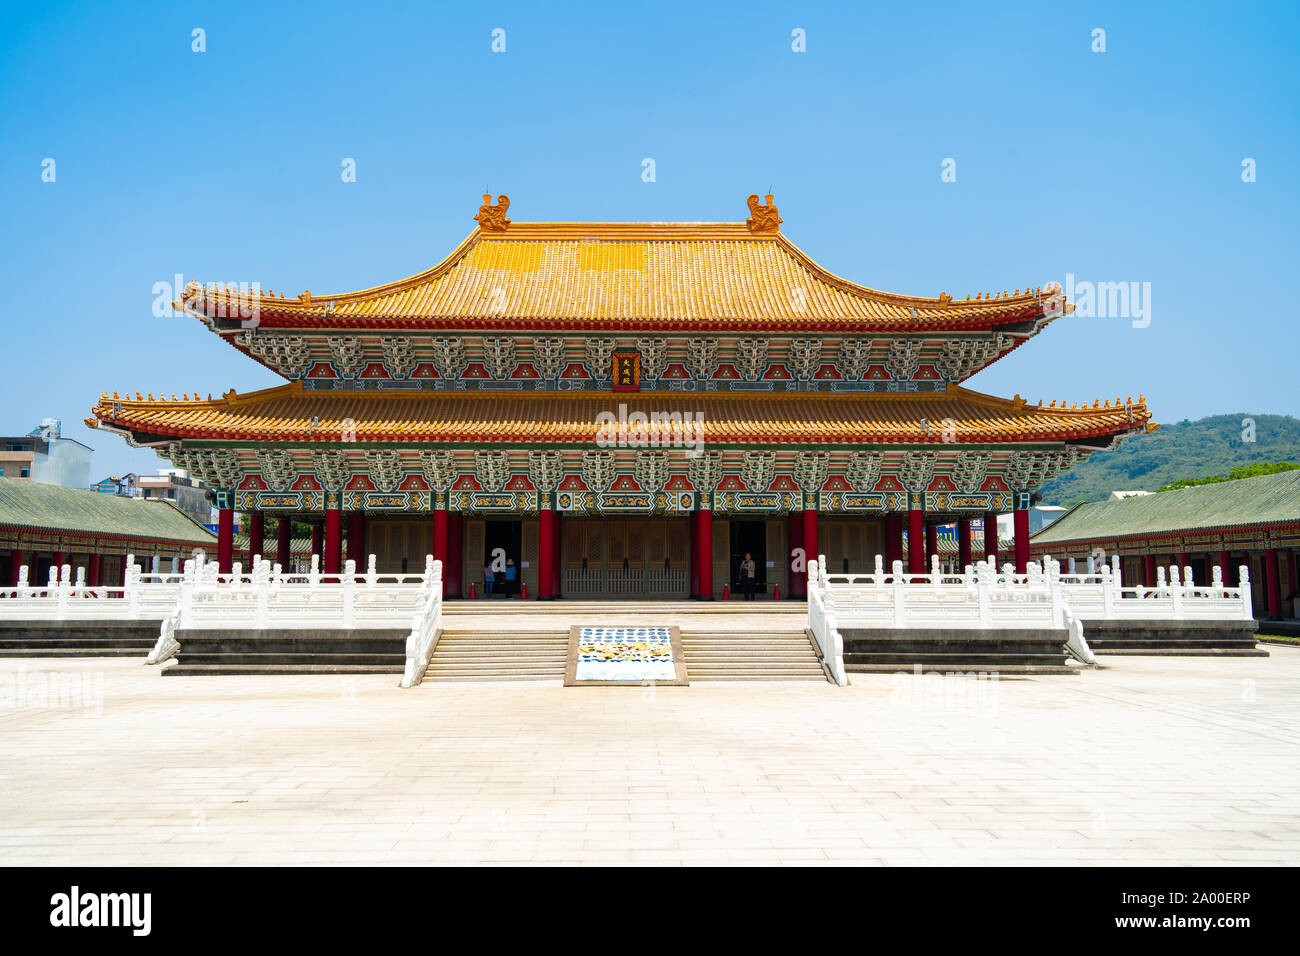 Kaohsiung, Taiwan: The Confucius Temple Complex with the main Building in the center on bright summer day with clear blue sky Stock Photo